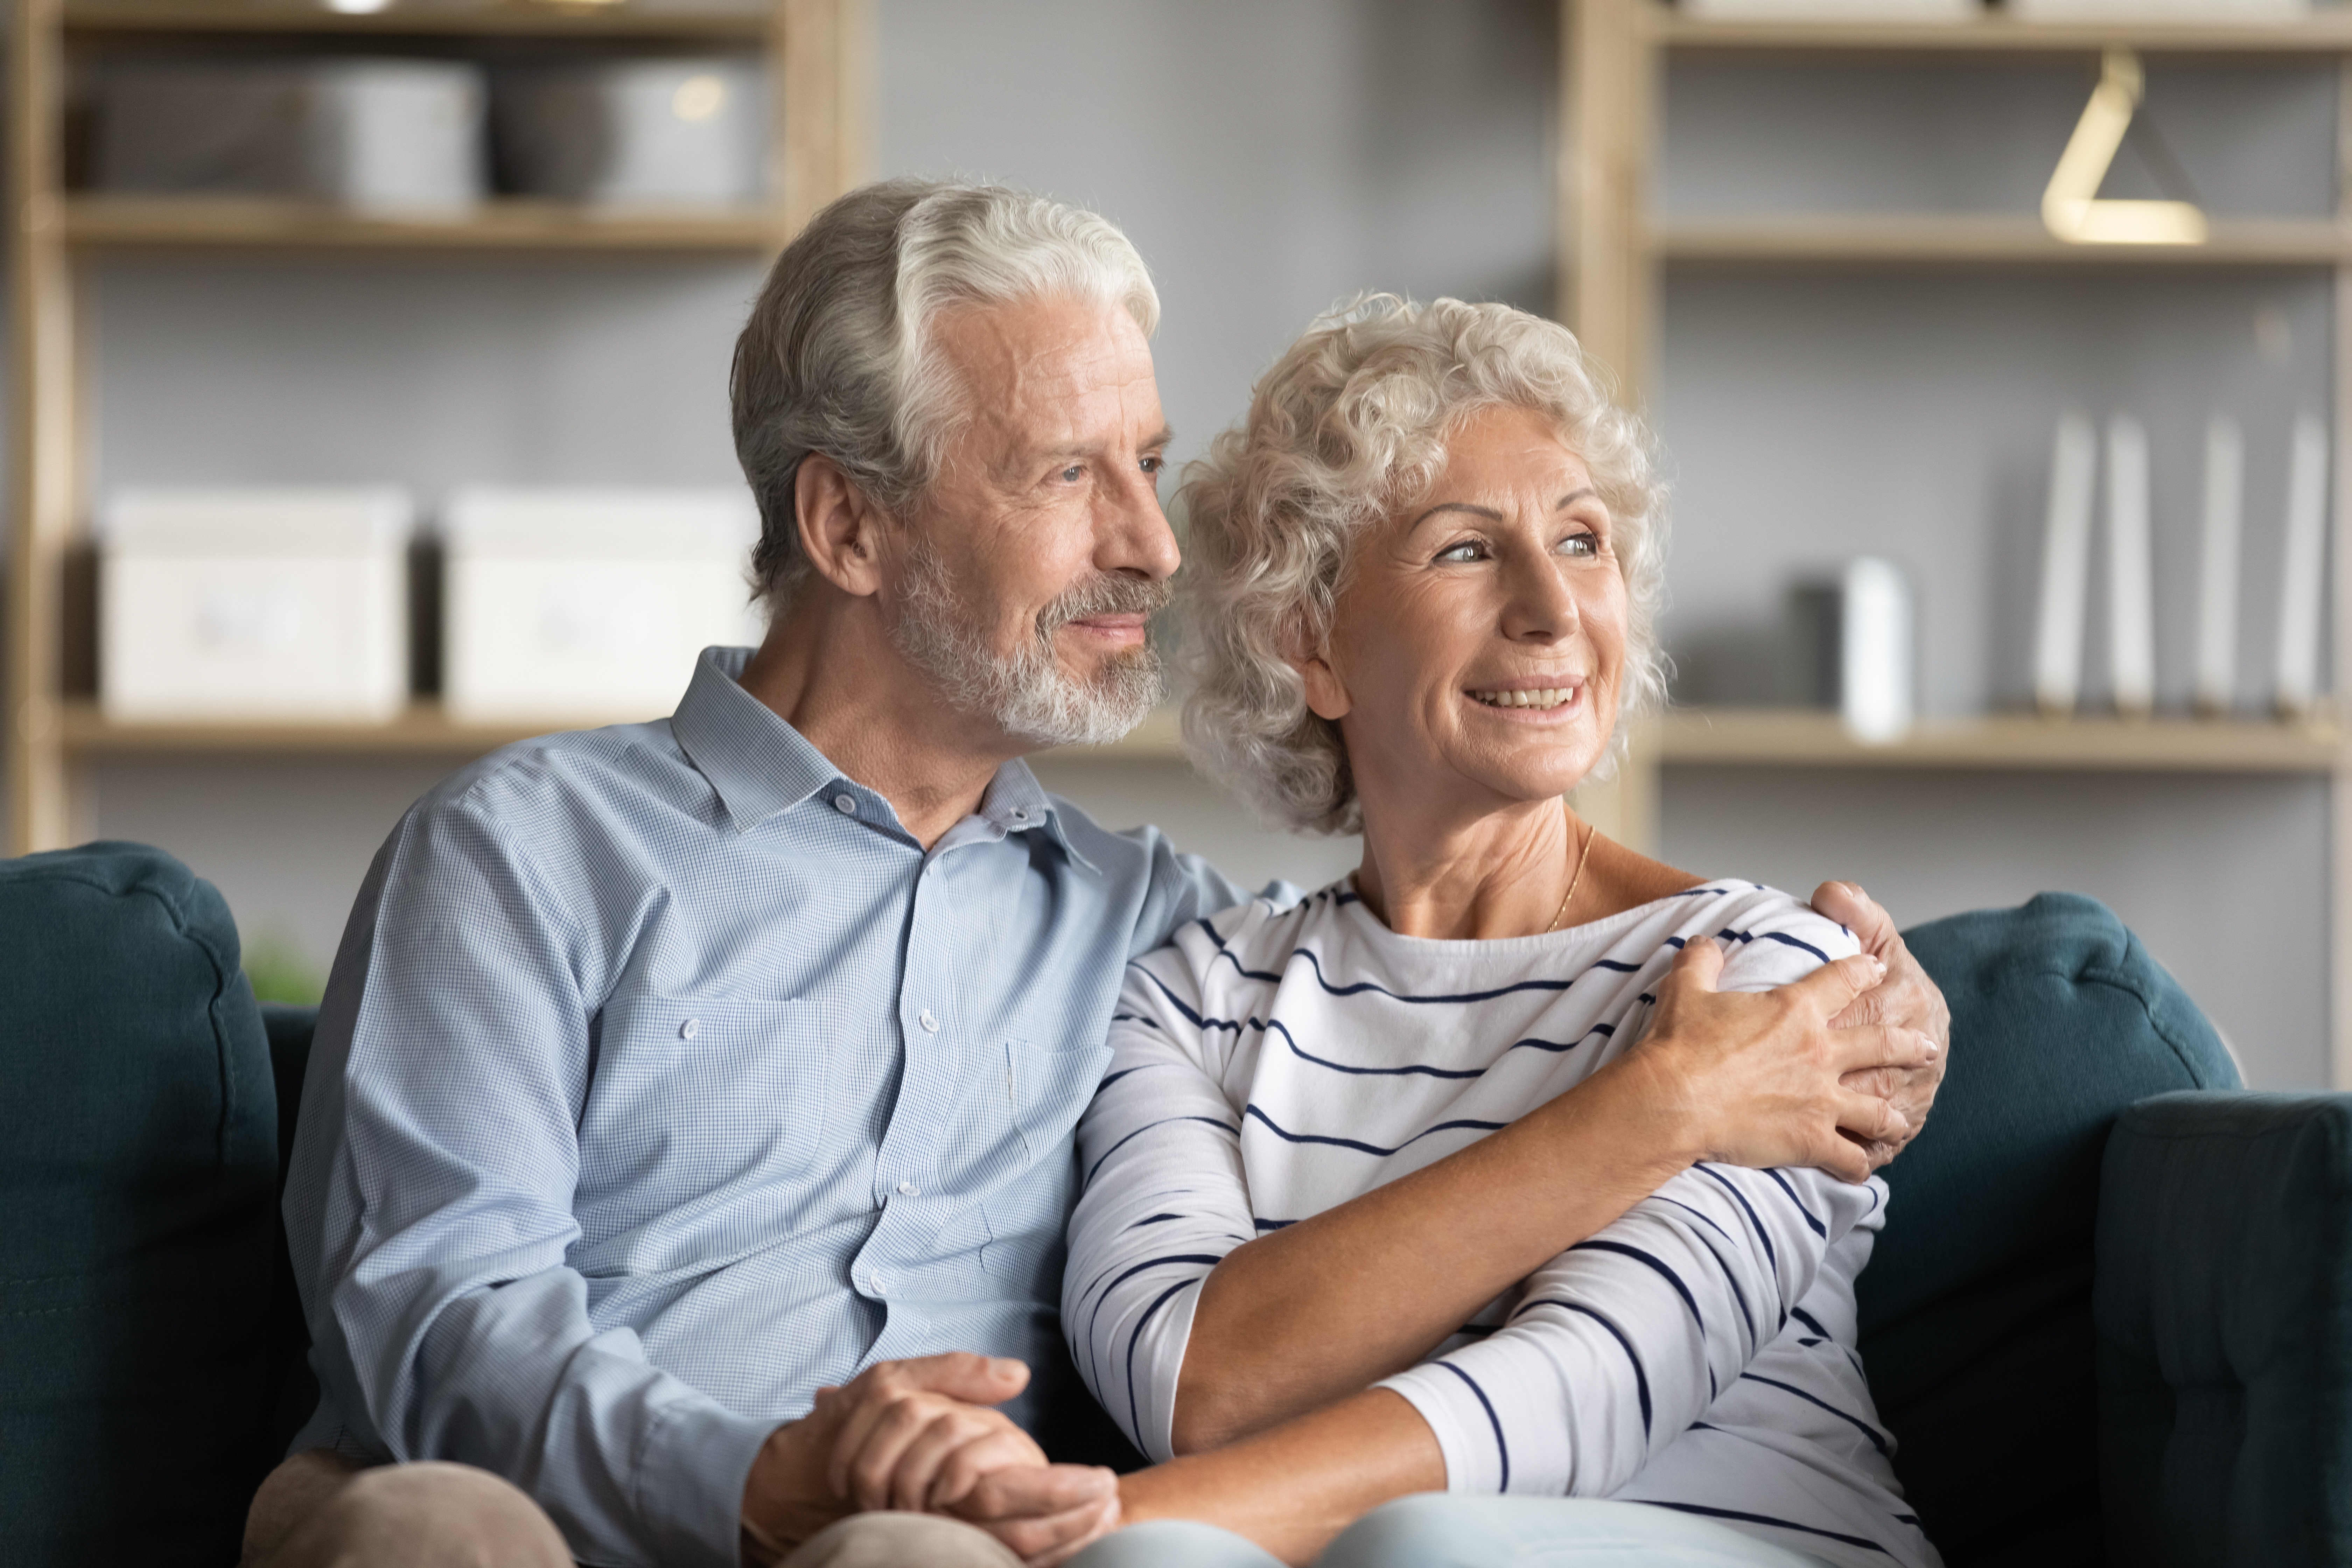 A happy senior couple relaxing at home | Source: Shutterstock